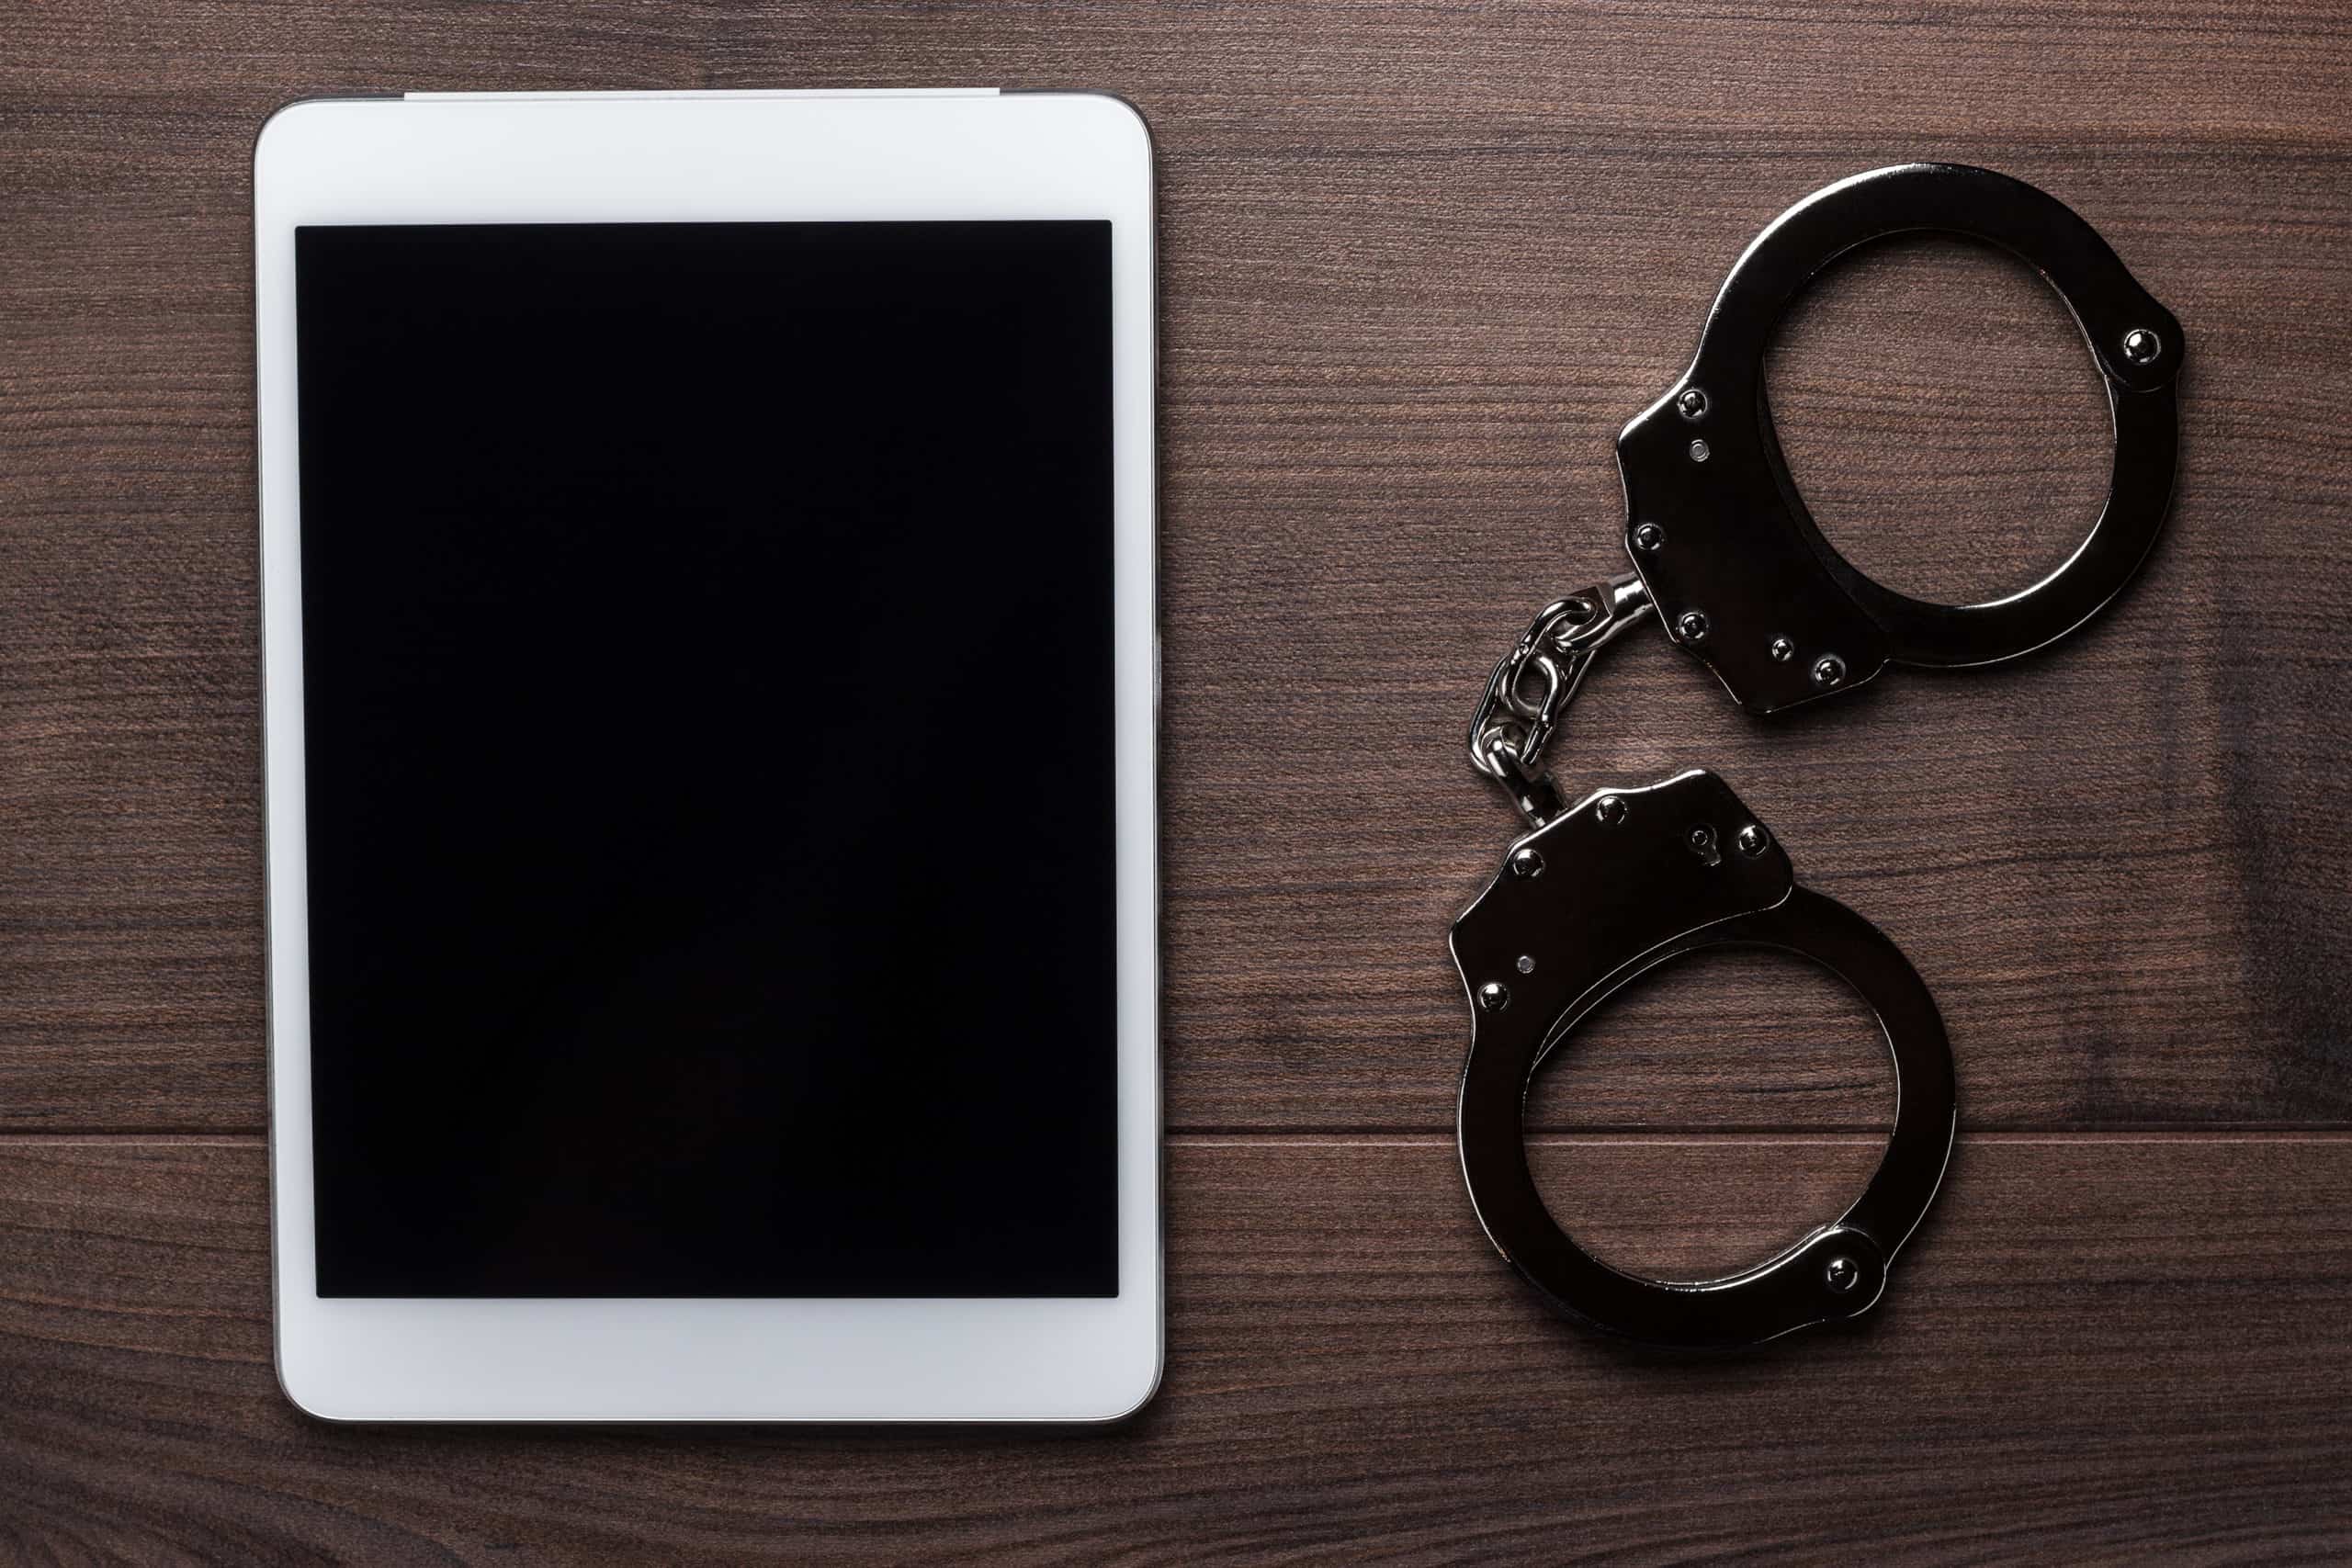 handcuffs and tablet computer on brown wooden background